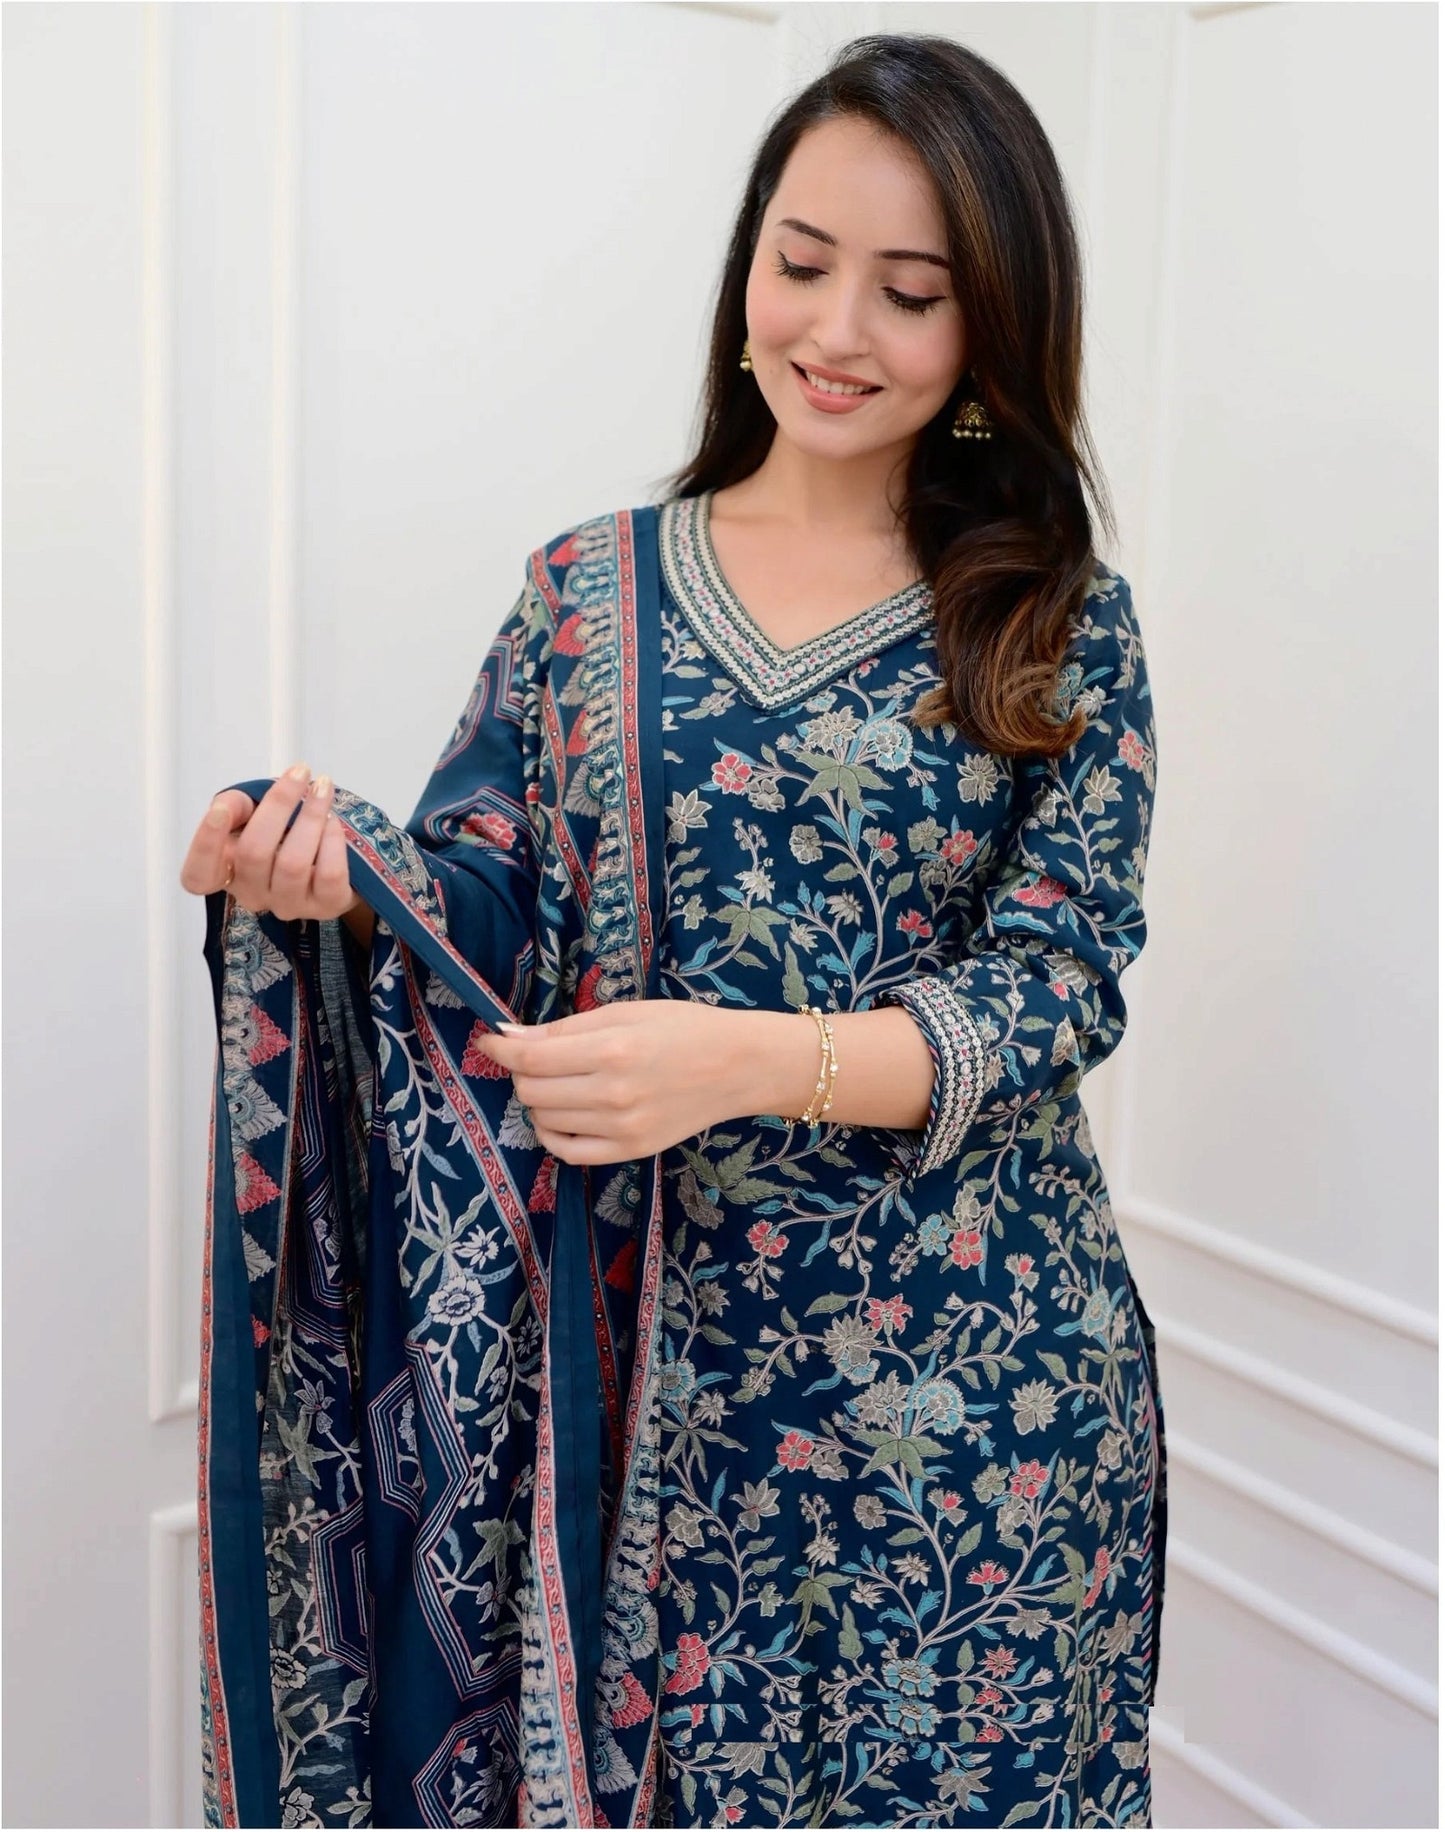 Peacock Blue Floral Rayon Afghani Suit for women